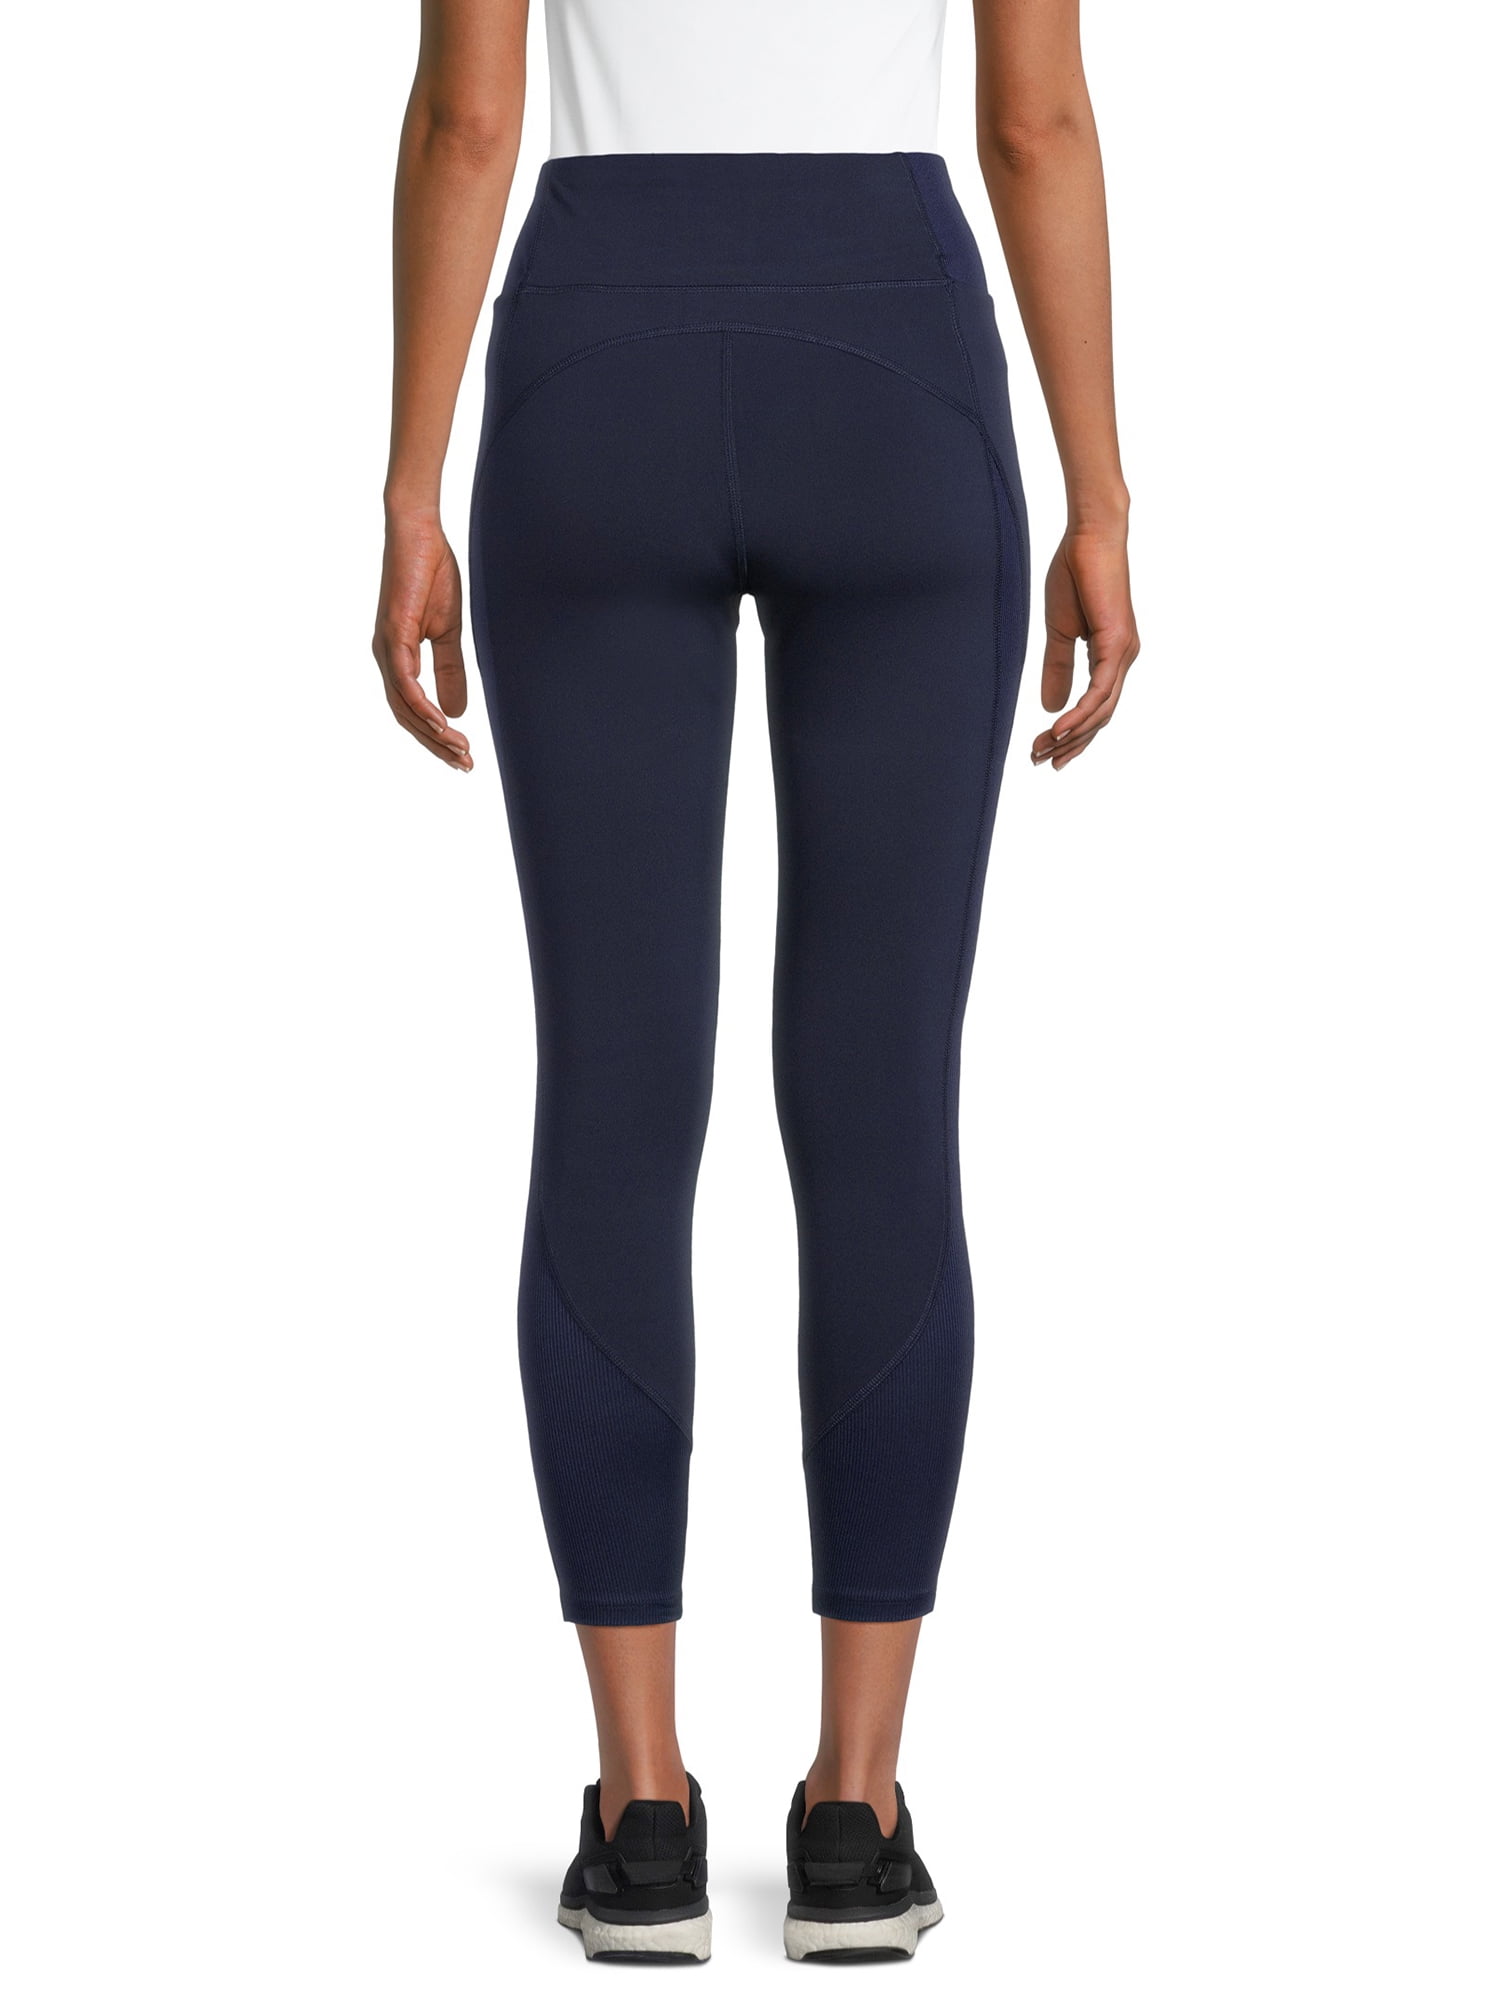 Avia Women's Performance Leggings with Ribbed Insets - Walmart